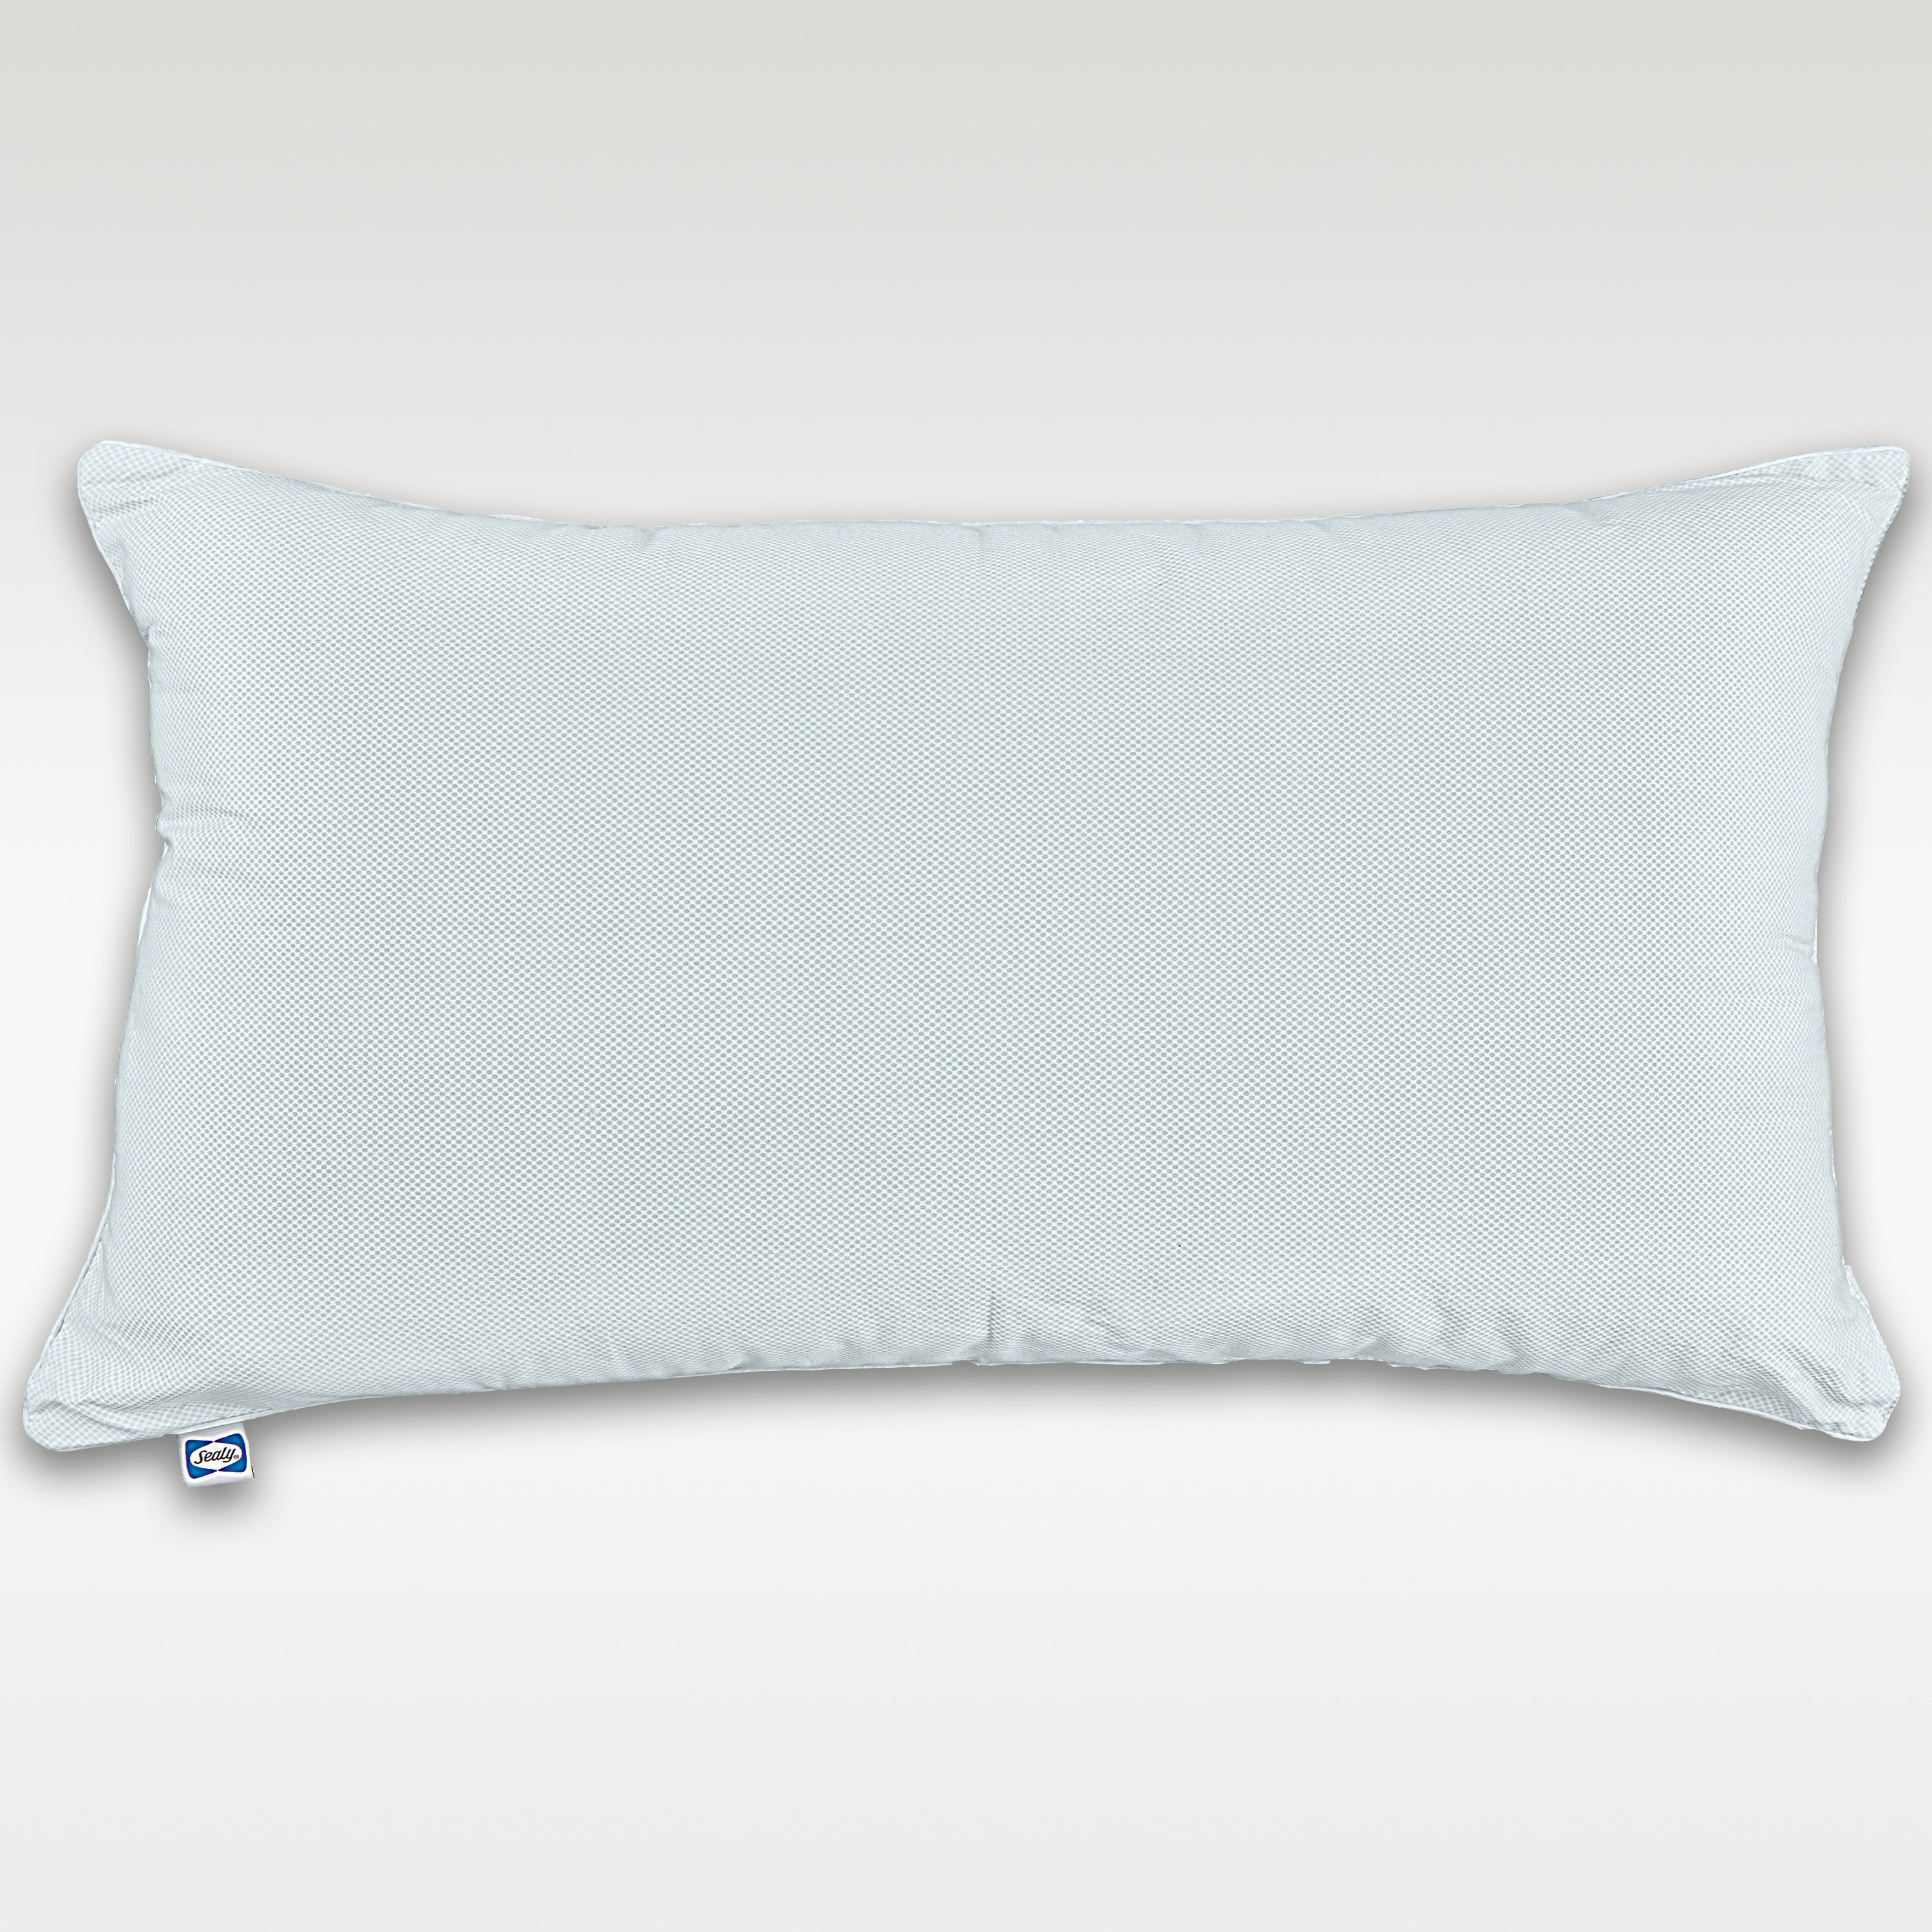 Sealy All Night Cooling Pillow, Standard/Queen - White